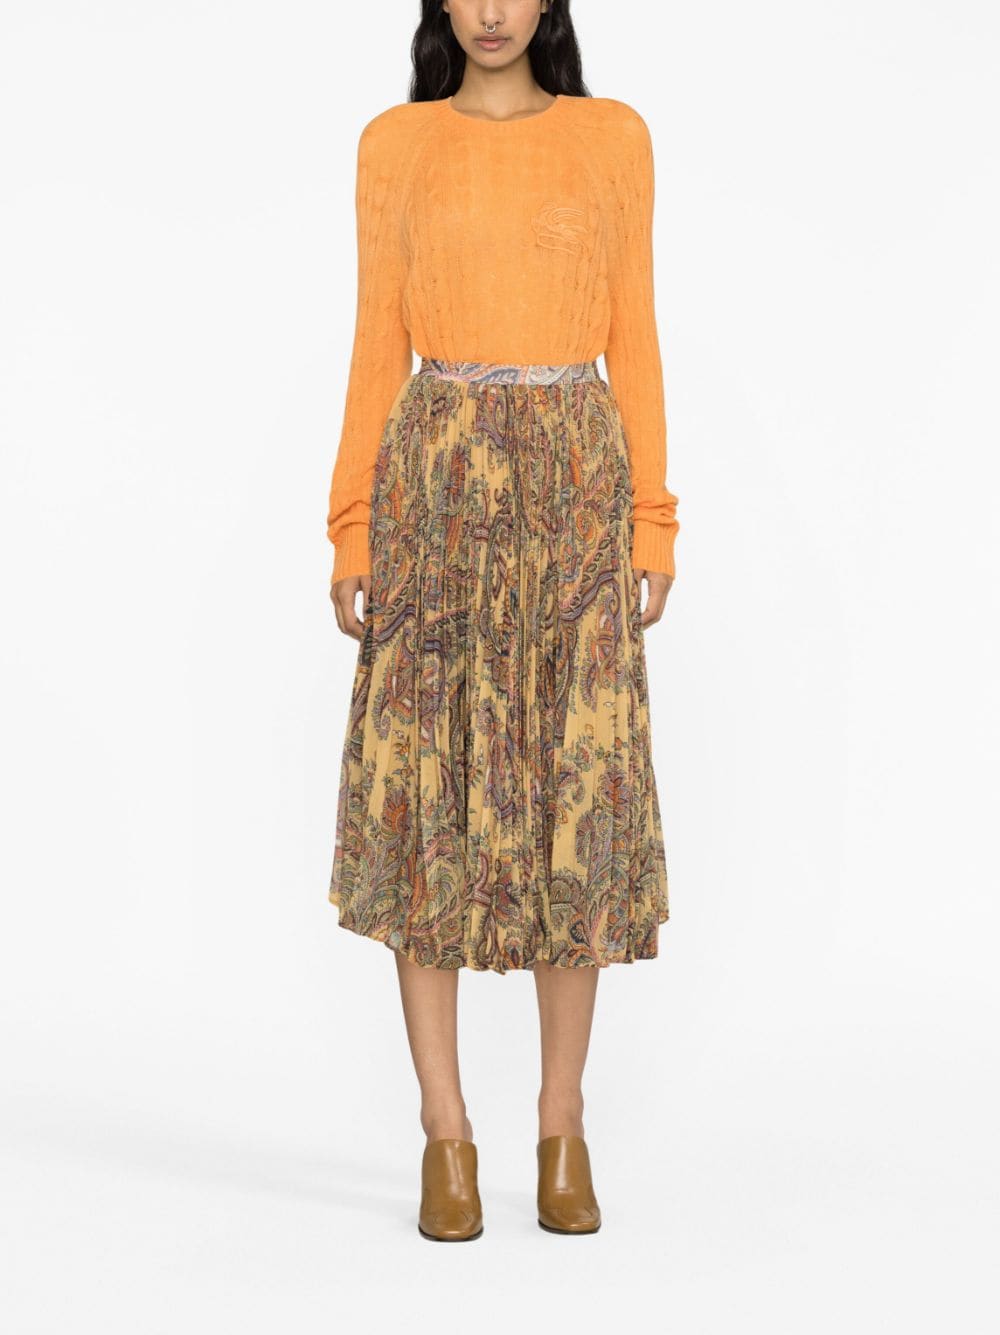 ETRO Stylish Pleated Long Skirt for the Modern Woman